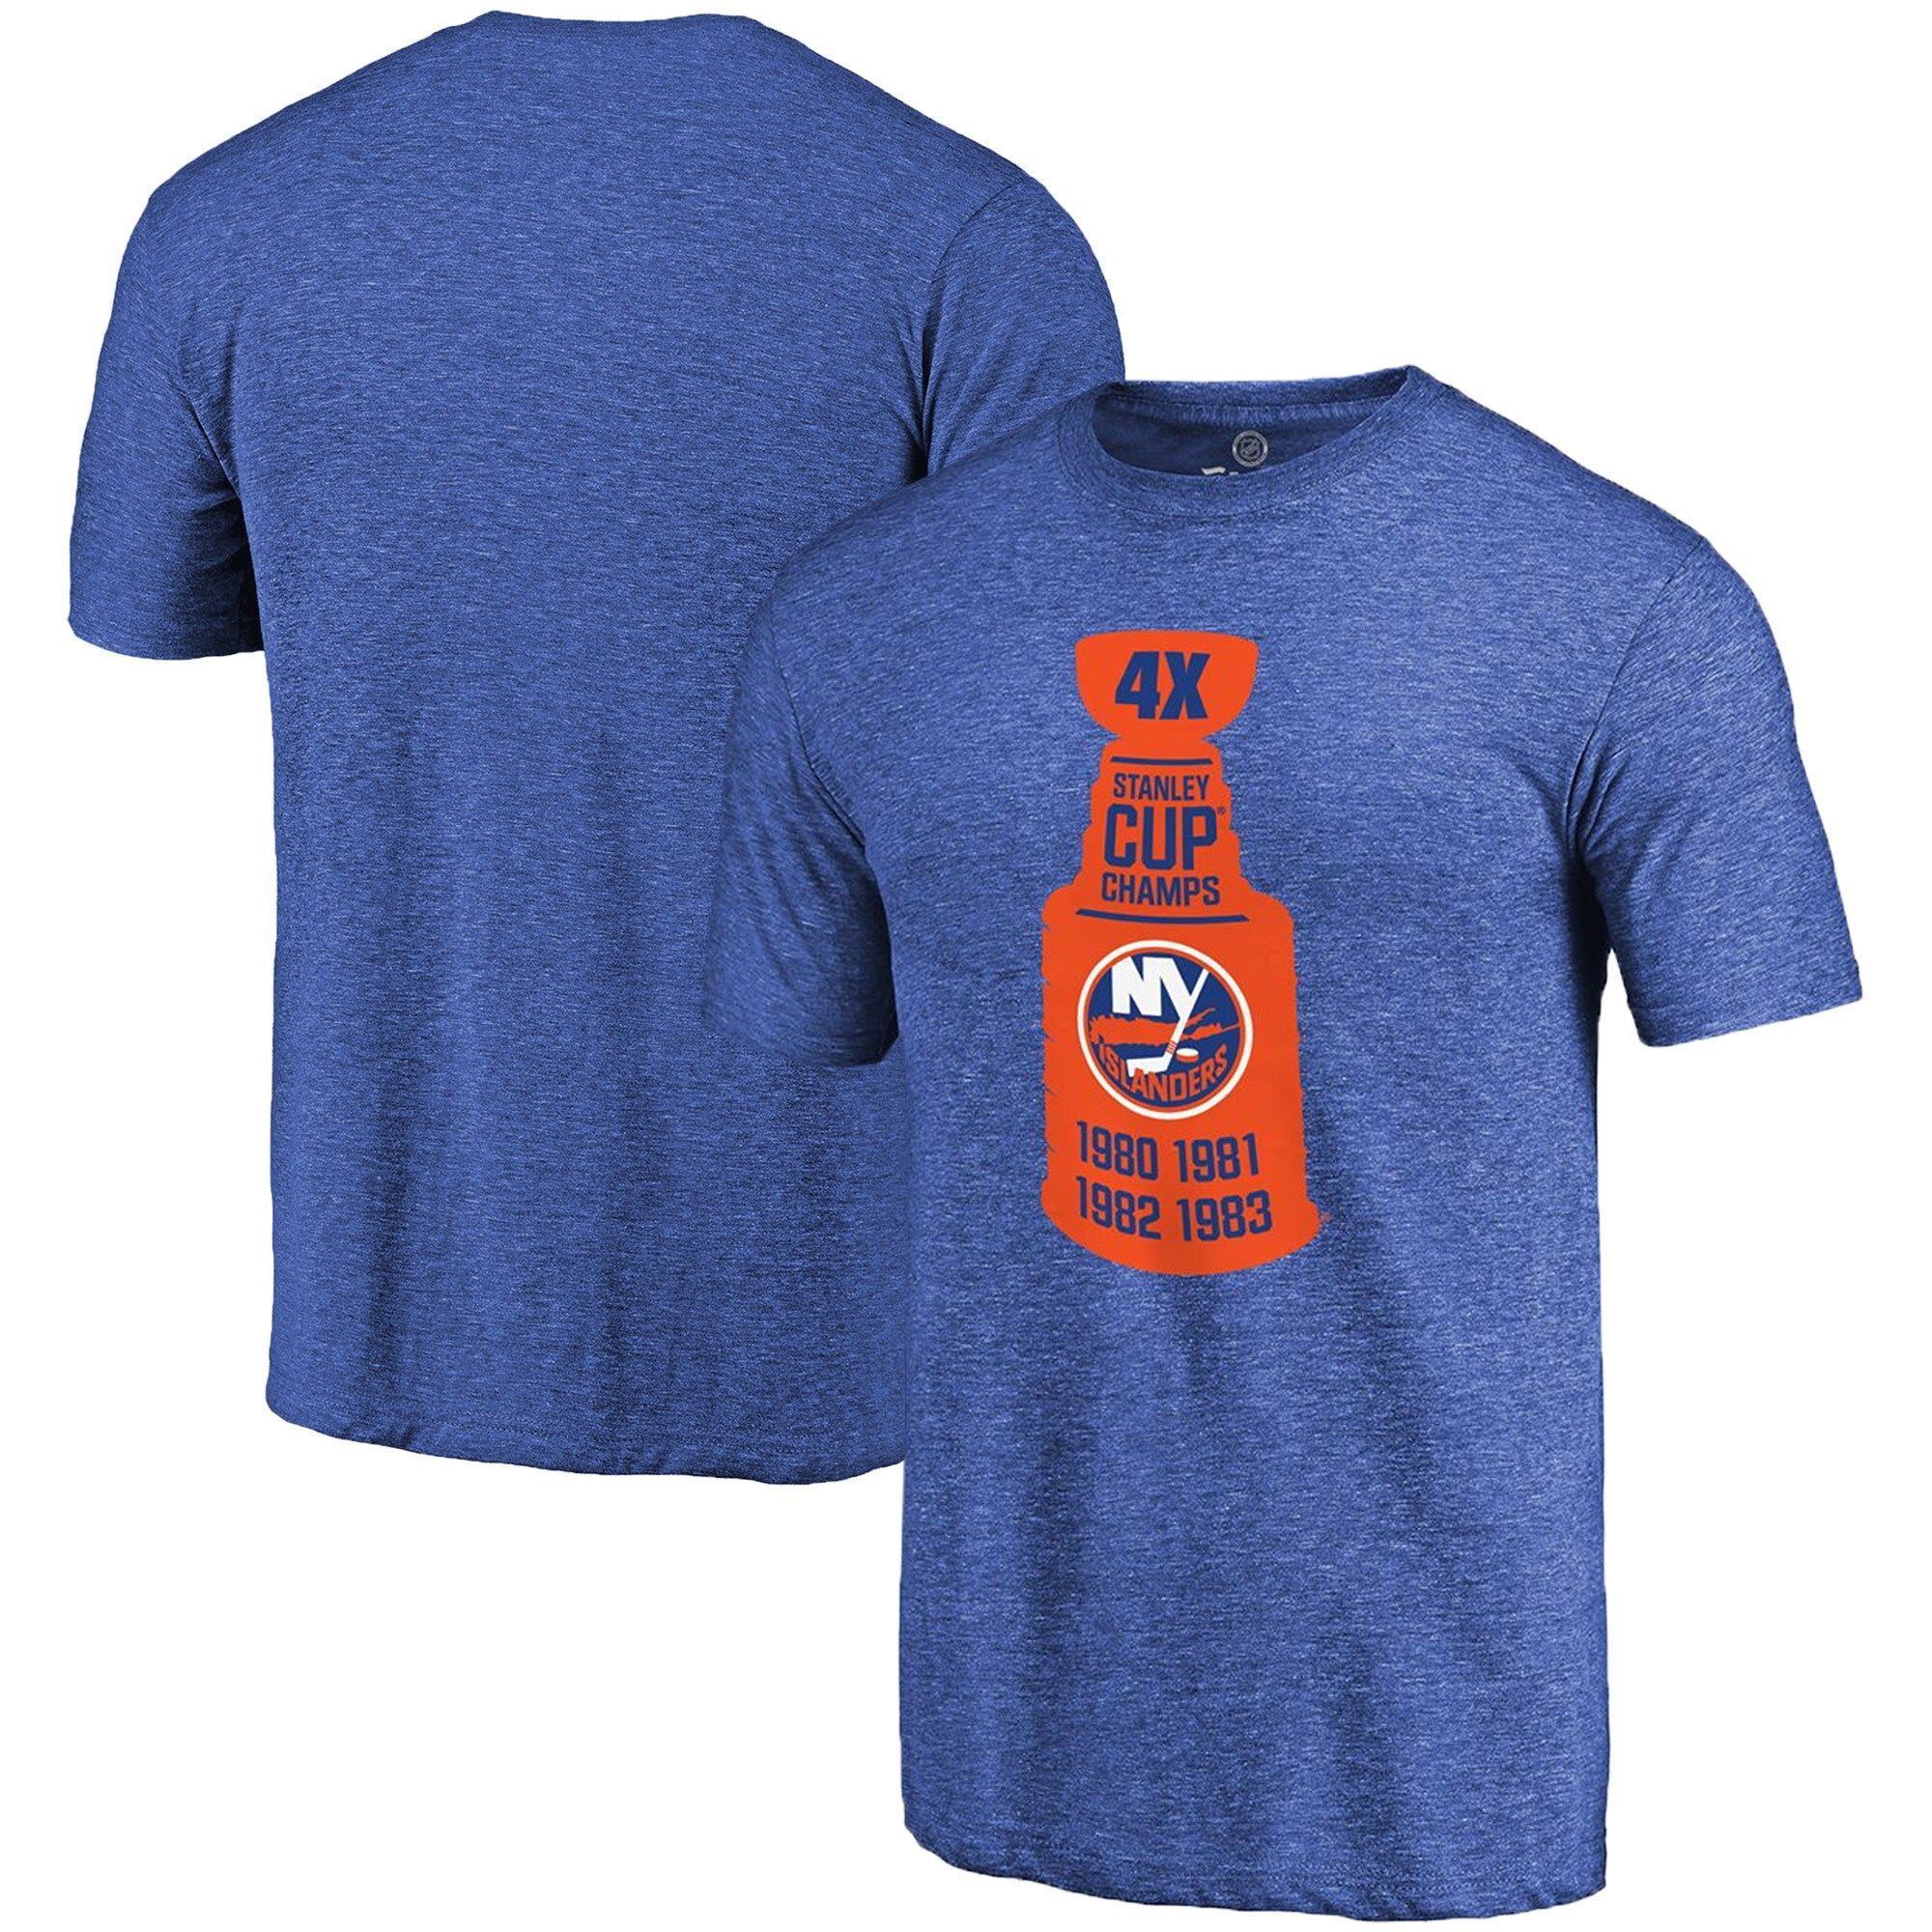 Men's Fanatics Branded Heathered Royal New York Islanders 4X Stanley Cup Champs T-Shirt